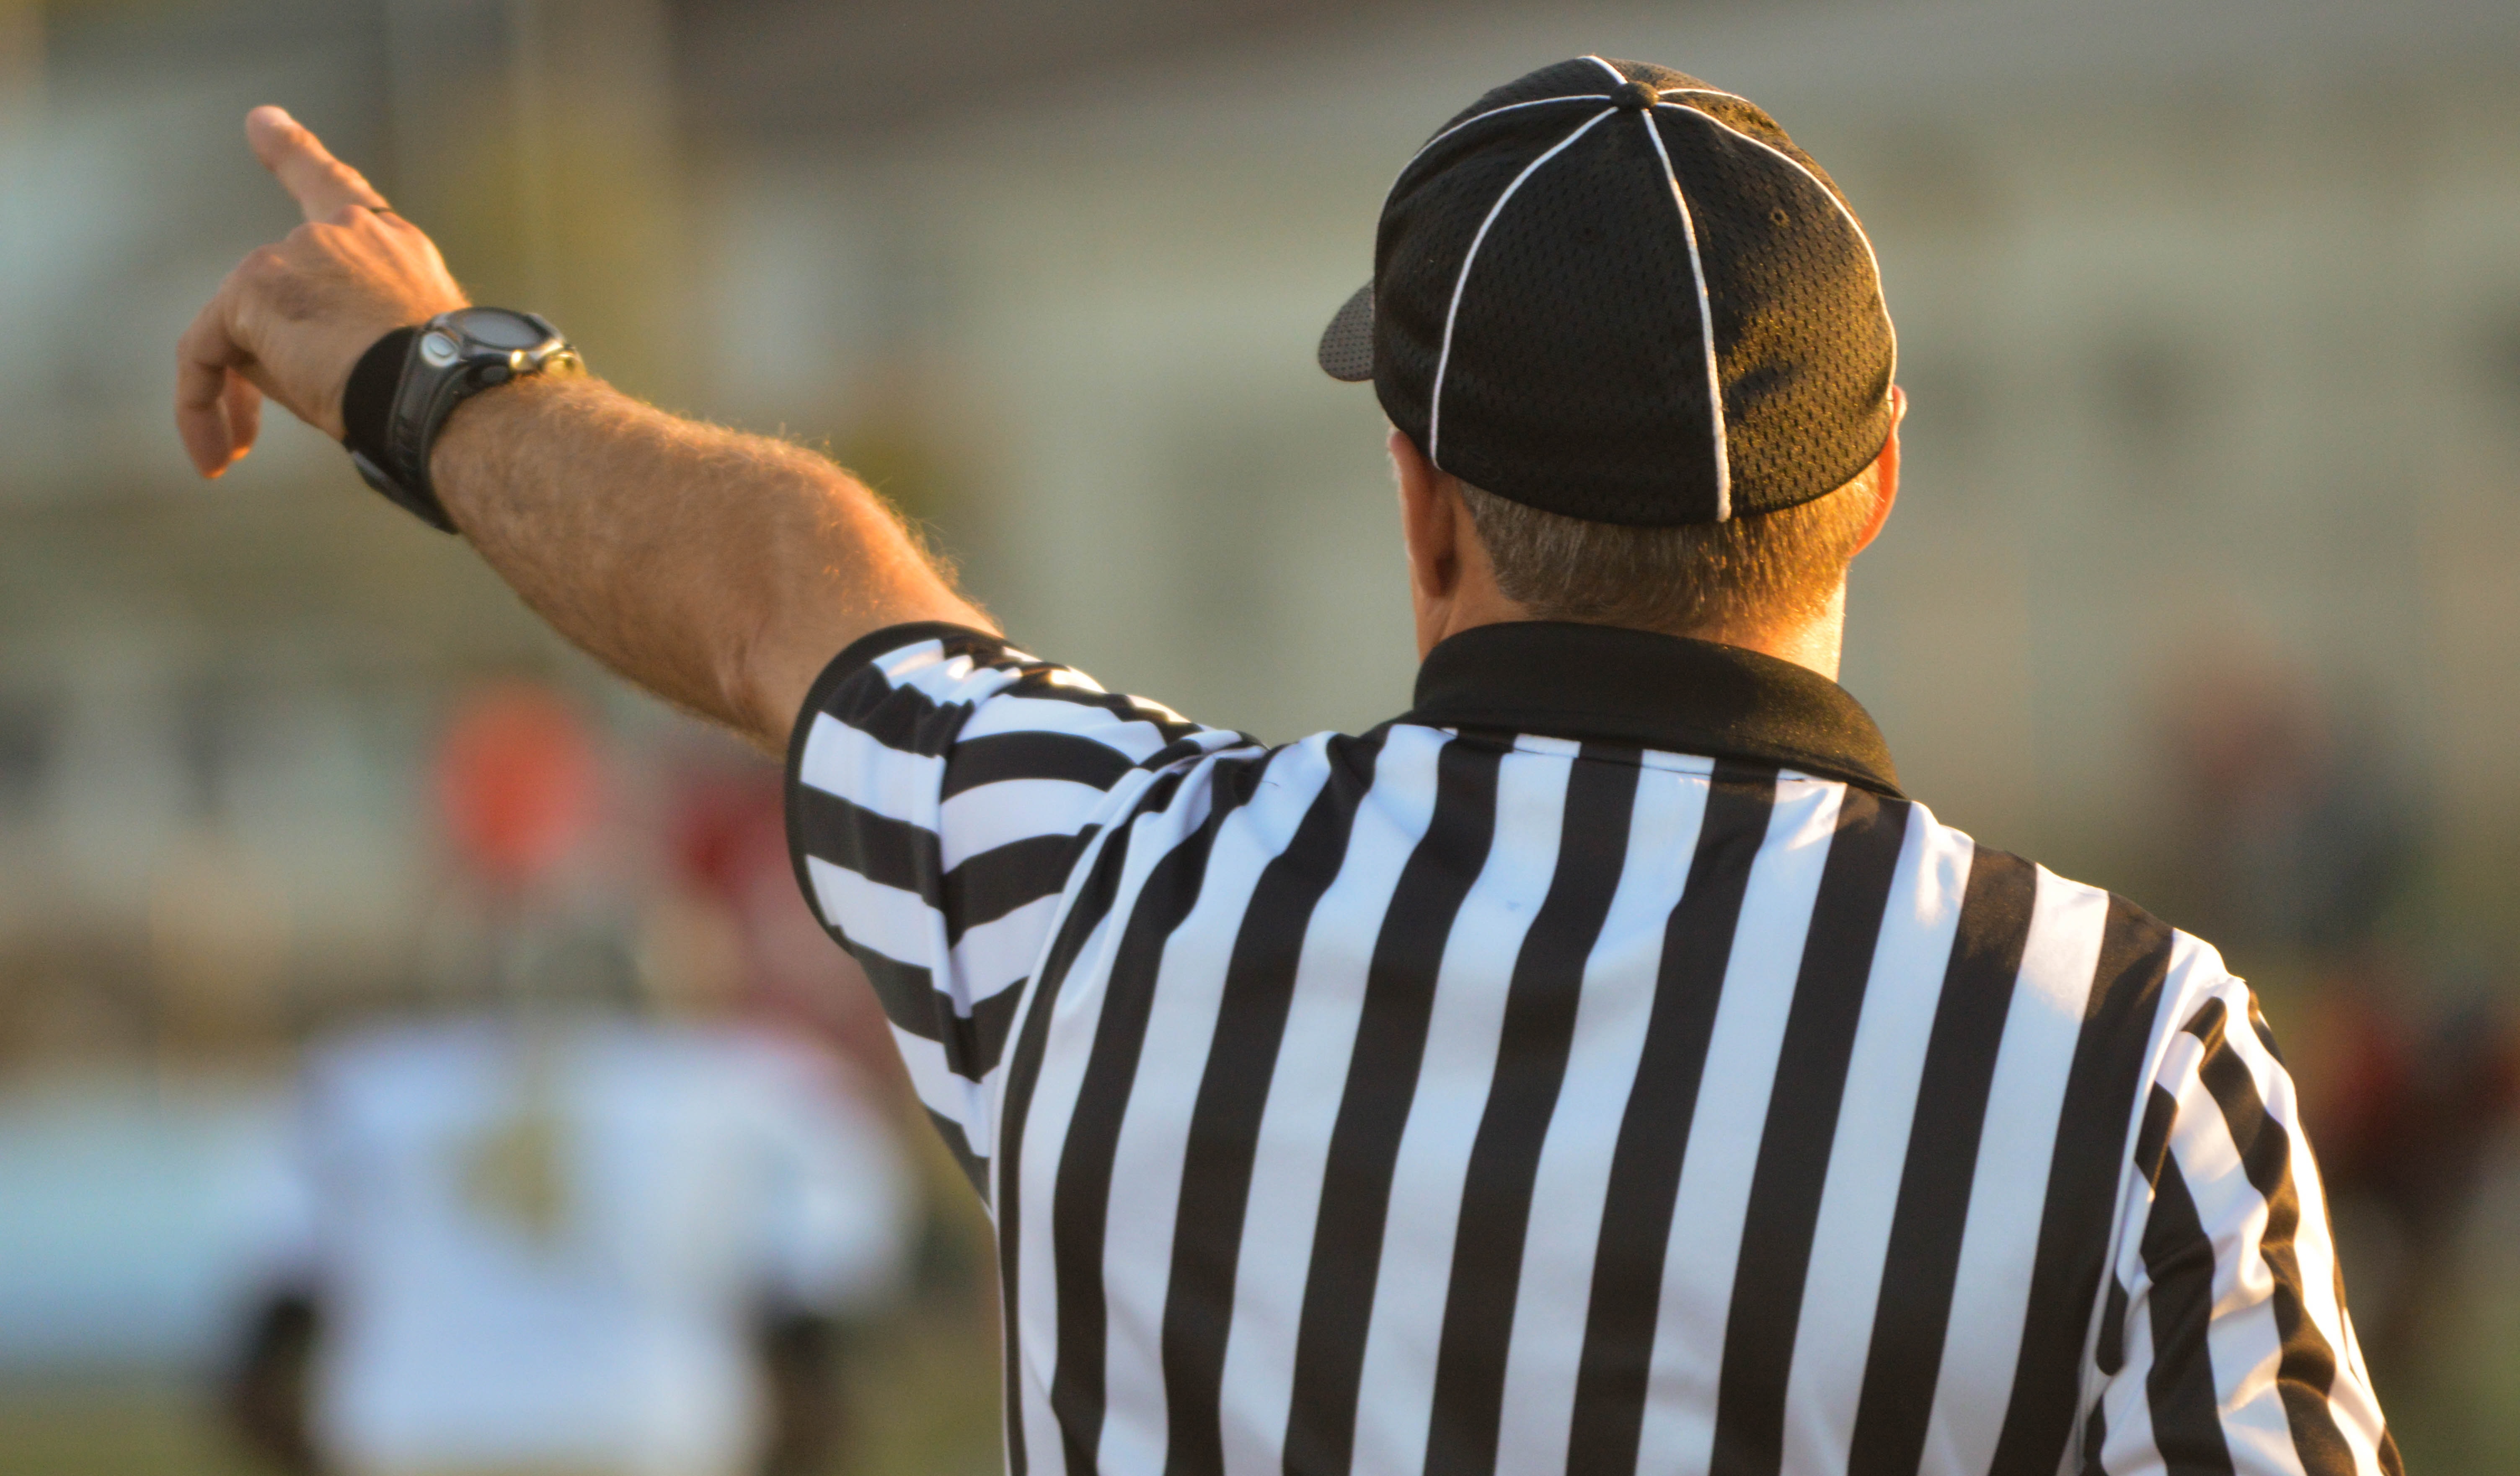 You're out! Umpire pointing; image by Nathan Shively, via Unsplash.com.